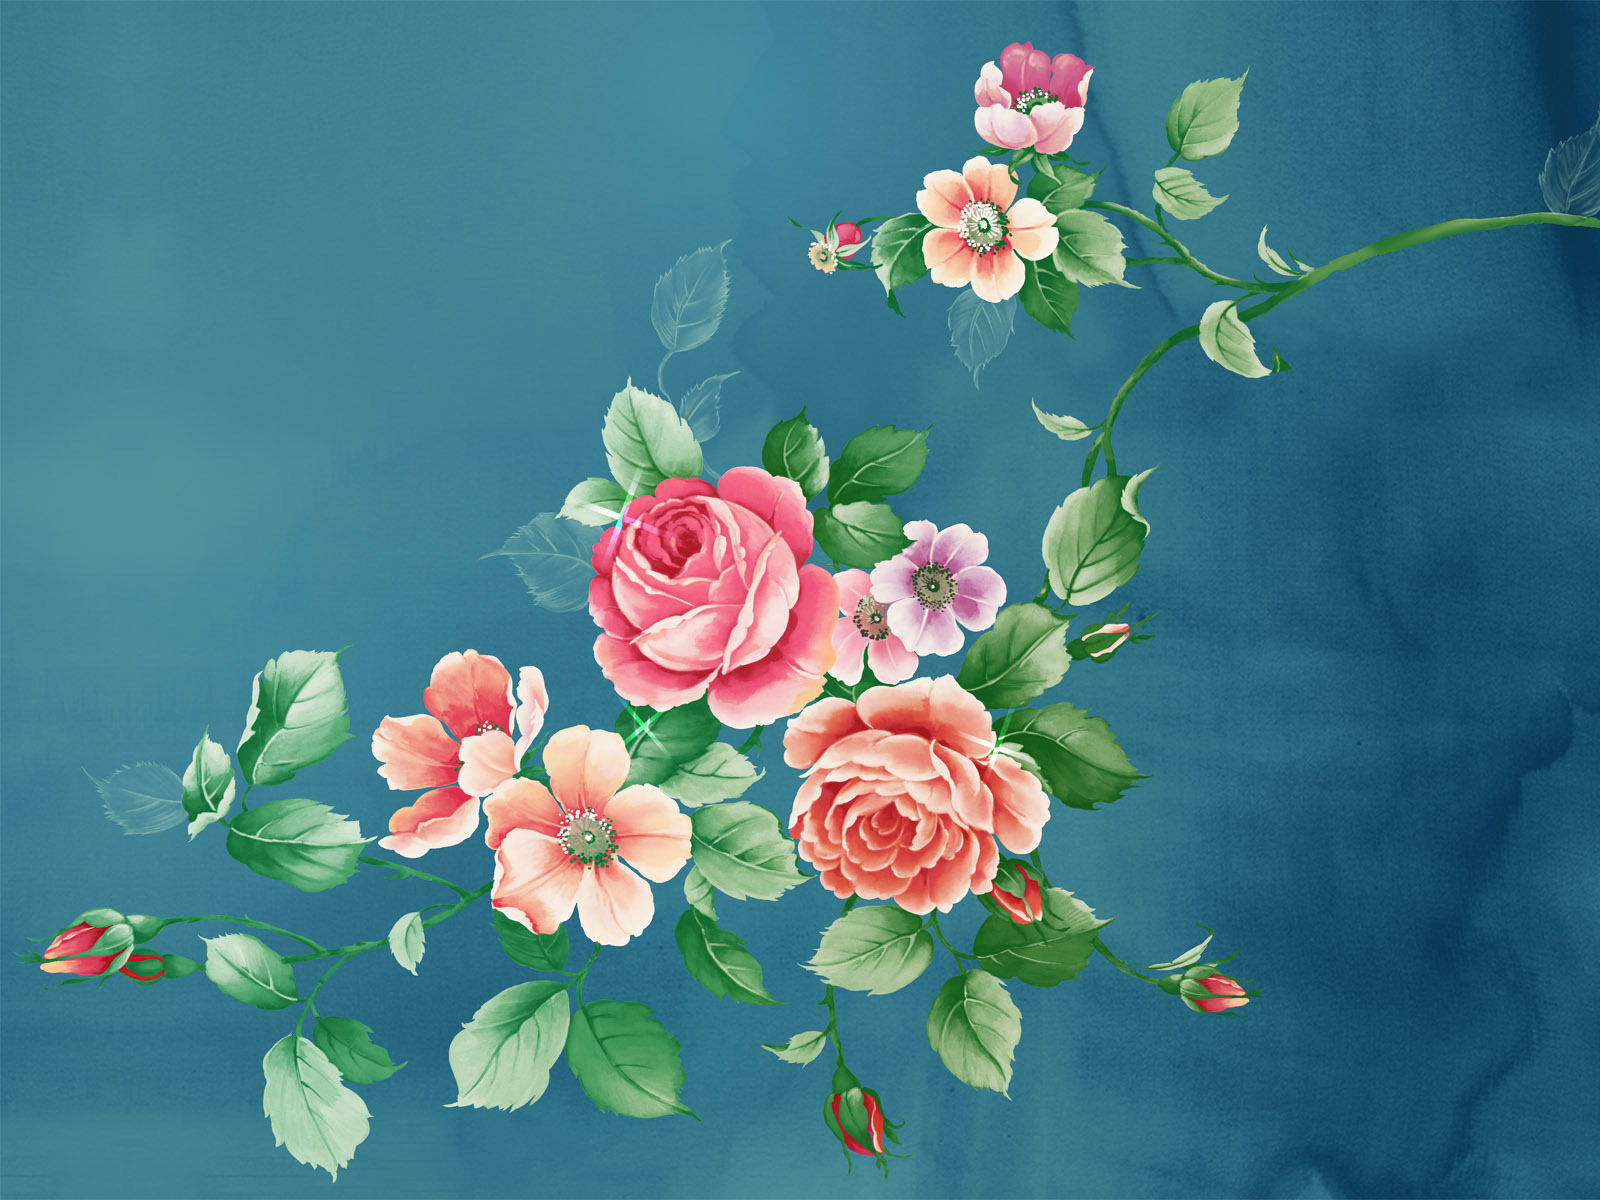 roses, plants, pictures, flowers, turquoise